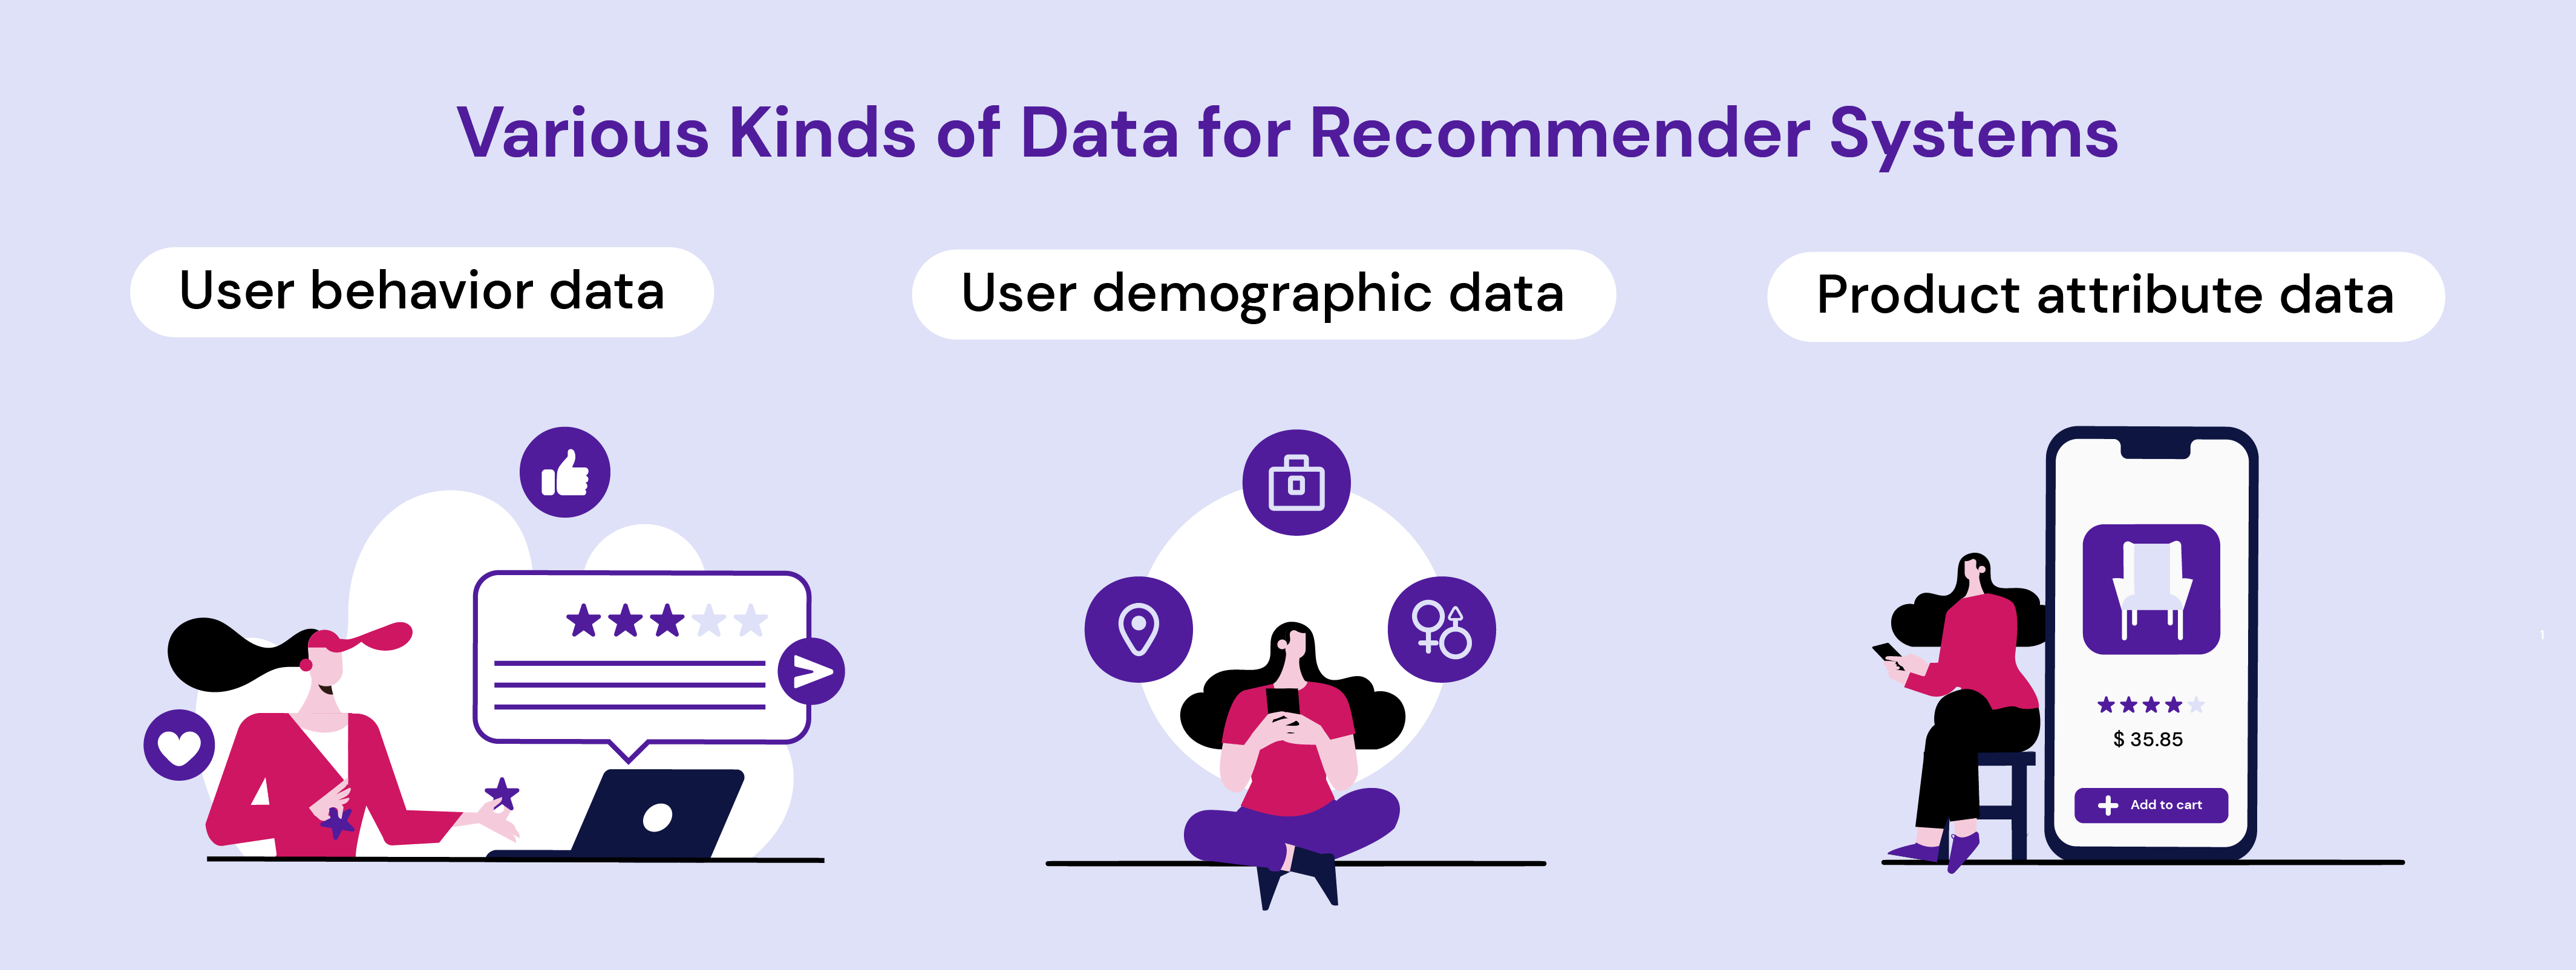 Various Kinds of Data for Recommender Systems